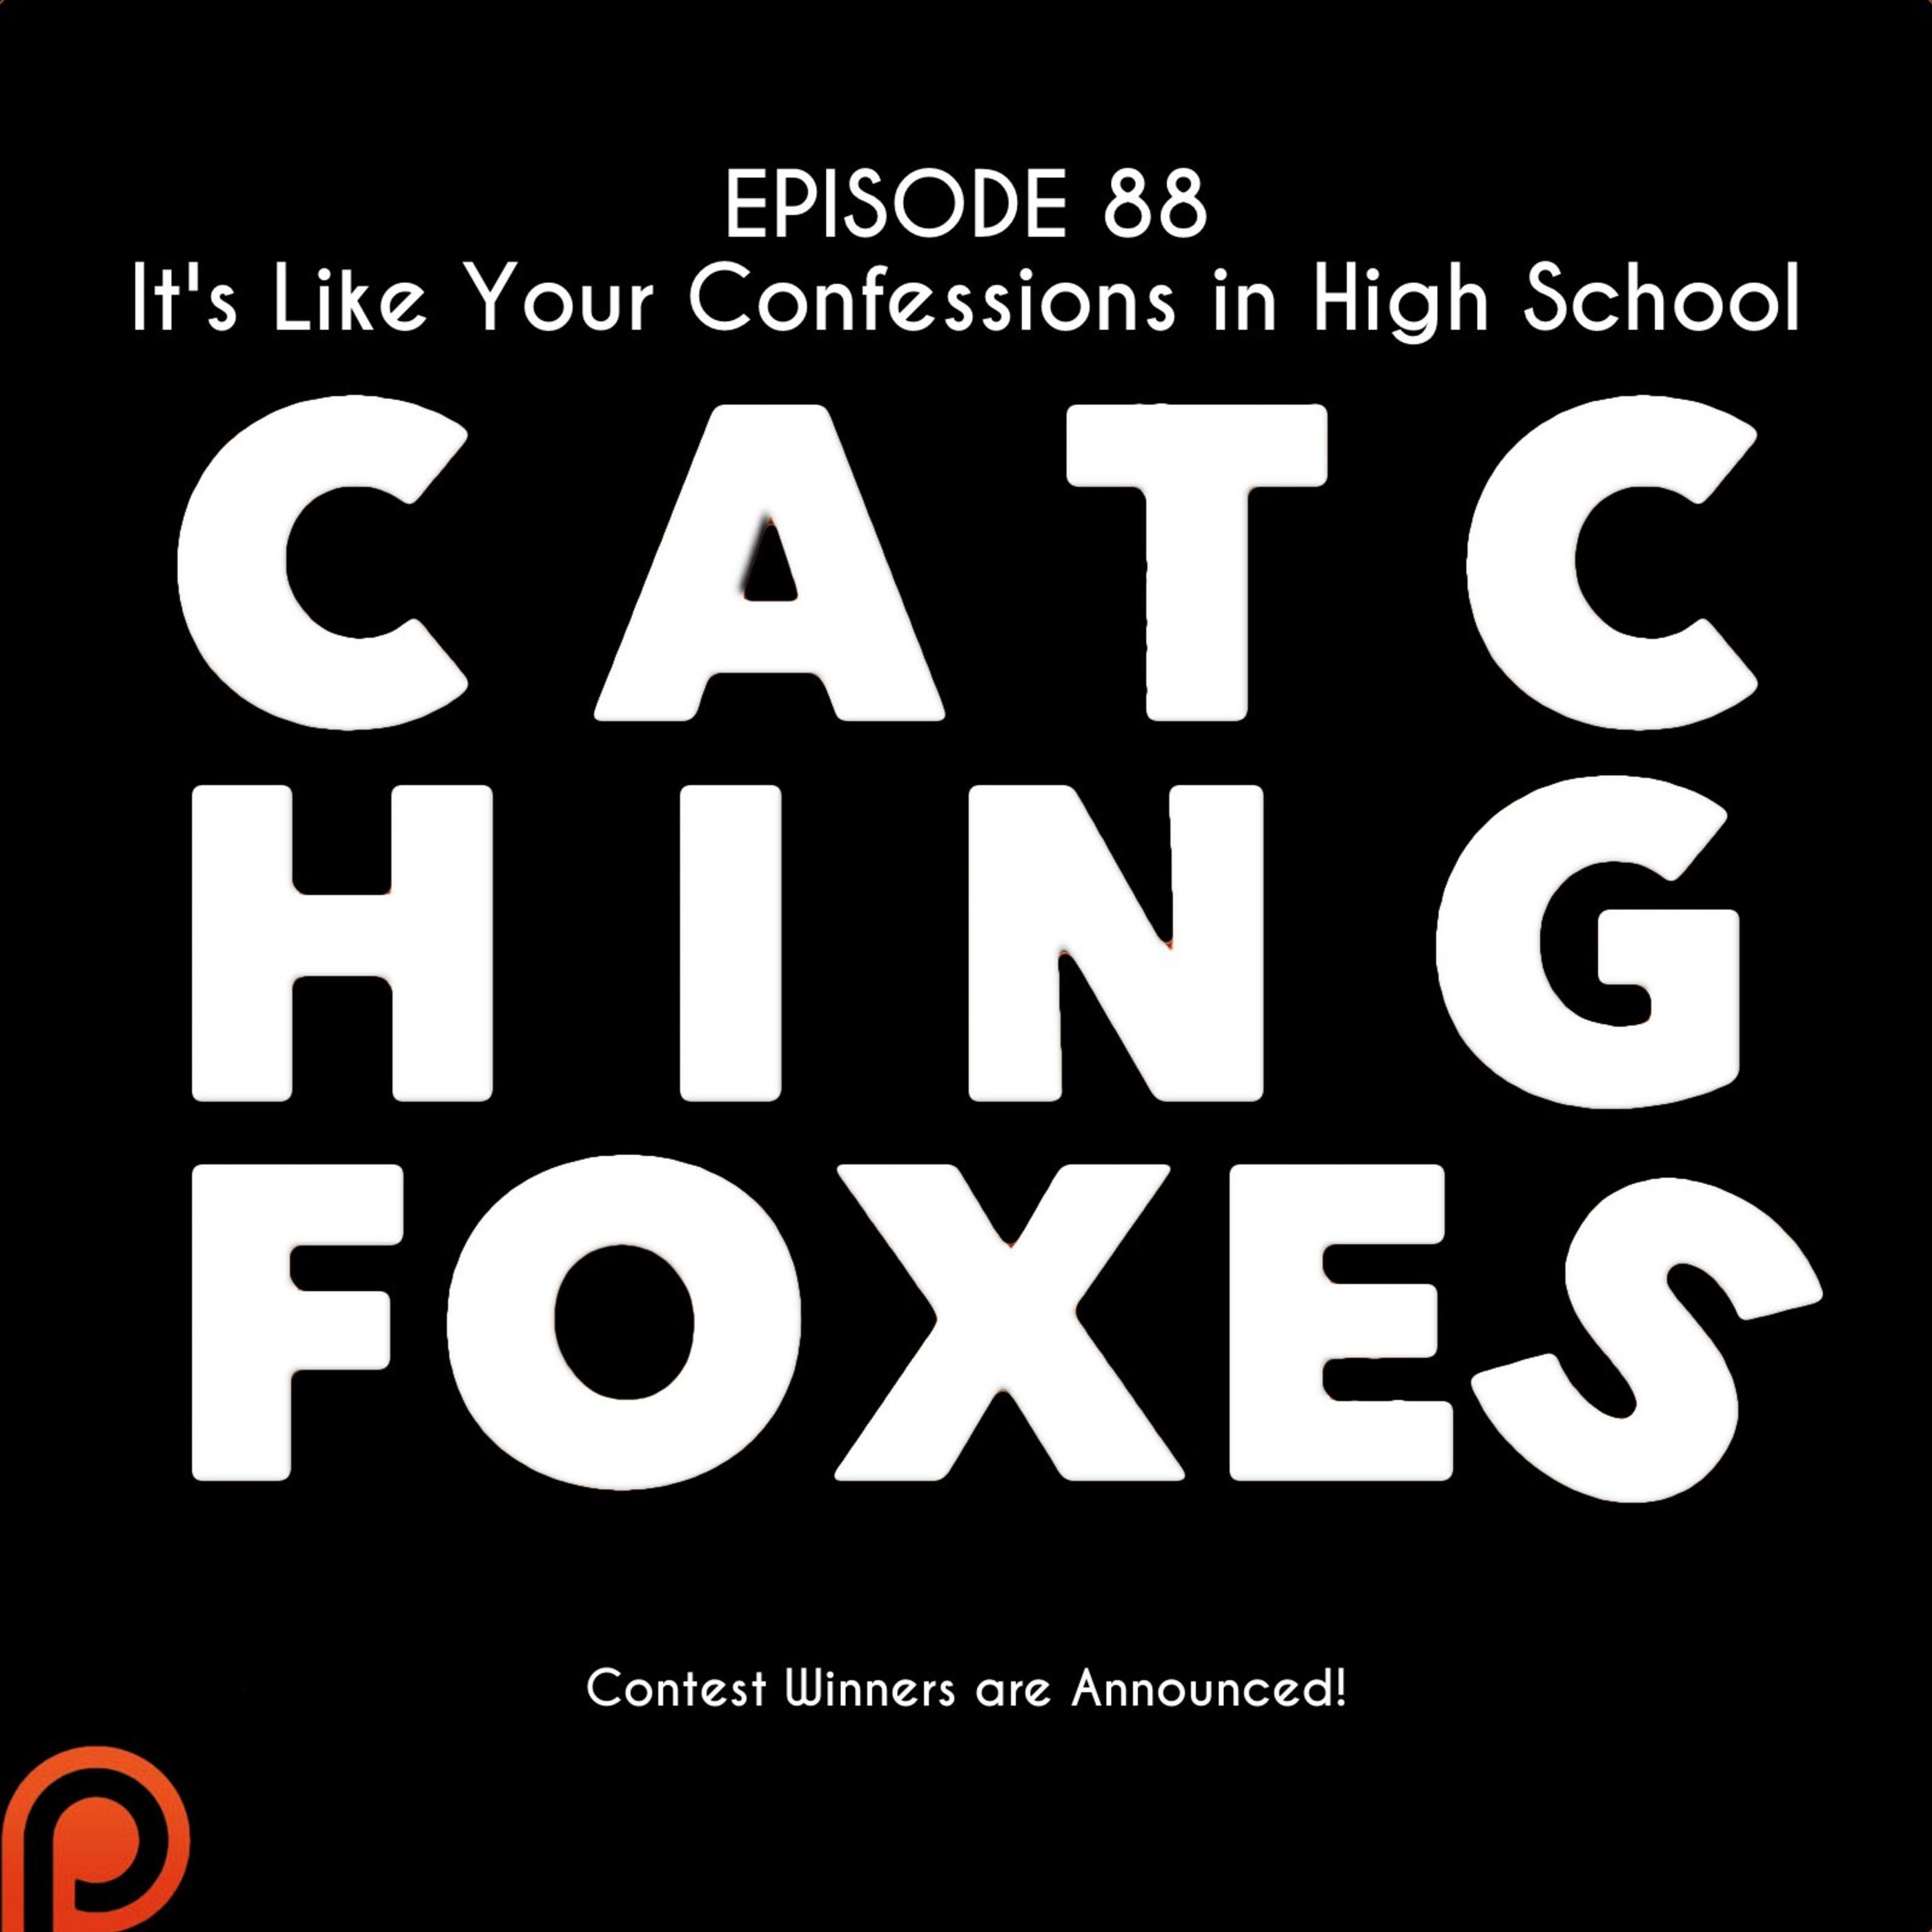 Episode 88: It's Like Your Confessions in High School